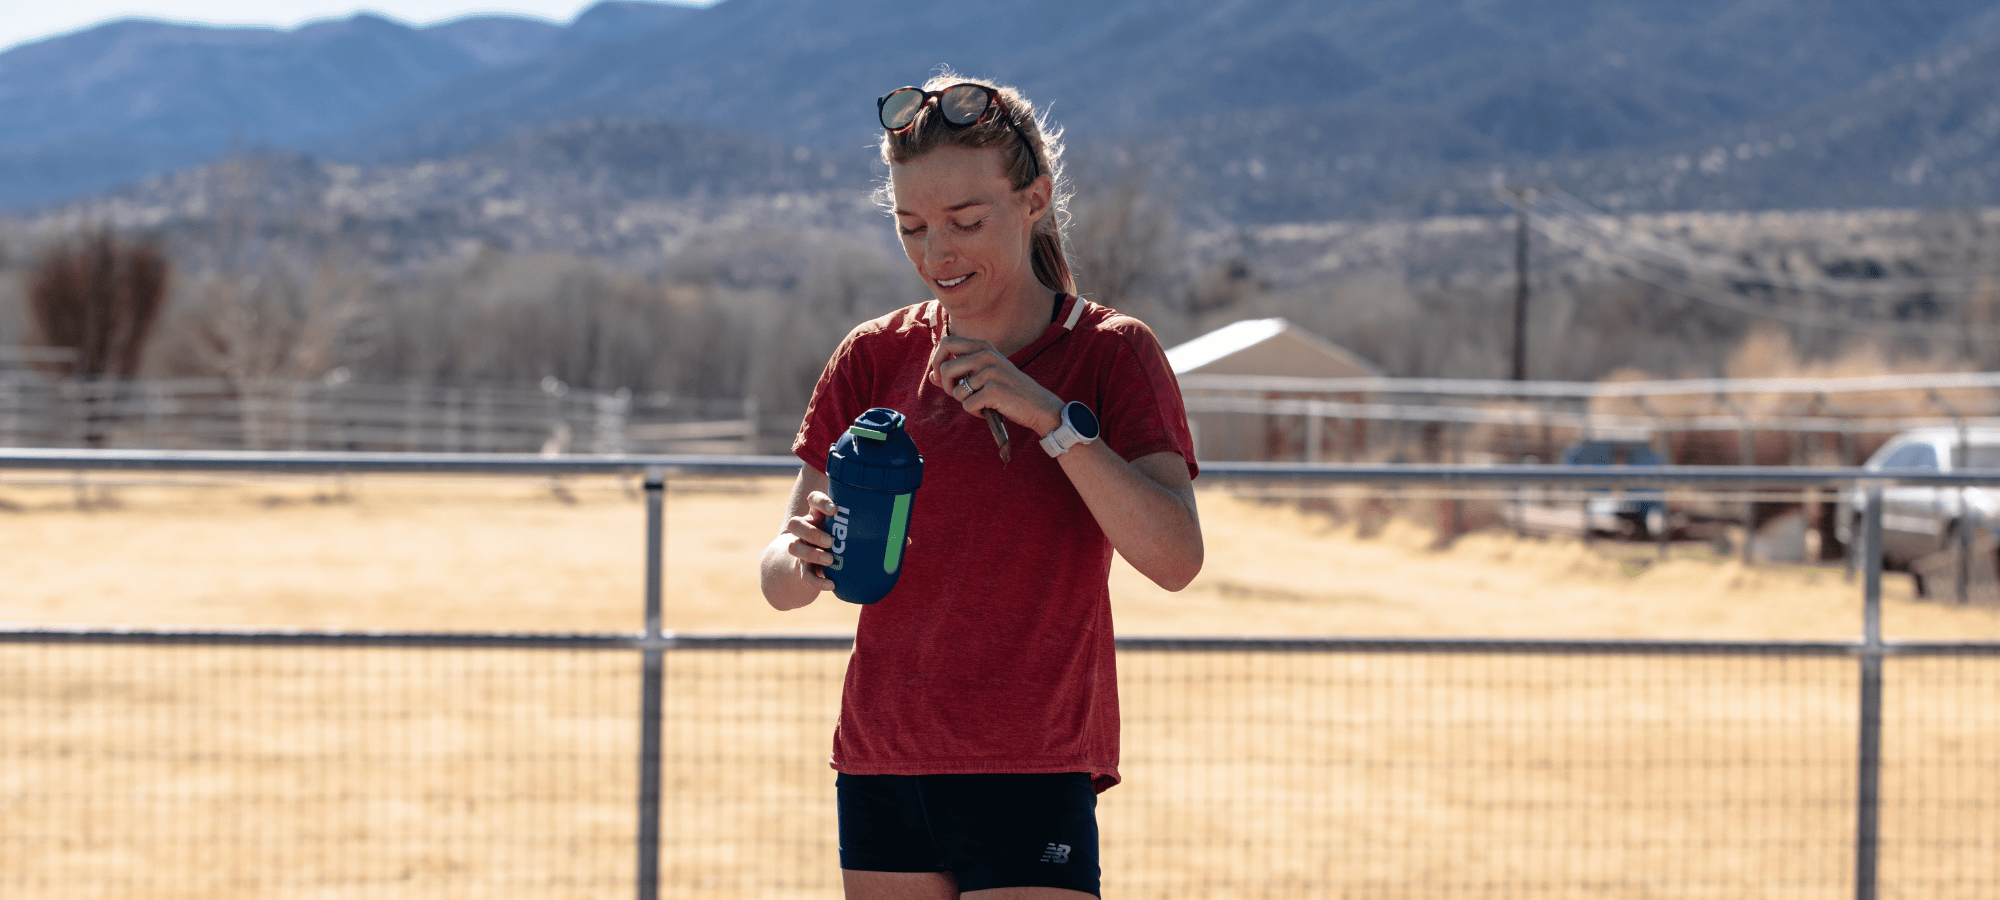 Recovery Nutrition: What You Should Eat After A Run